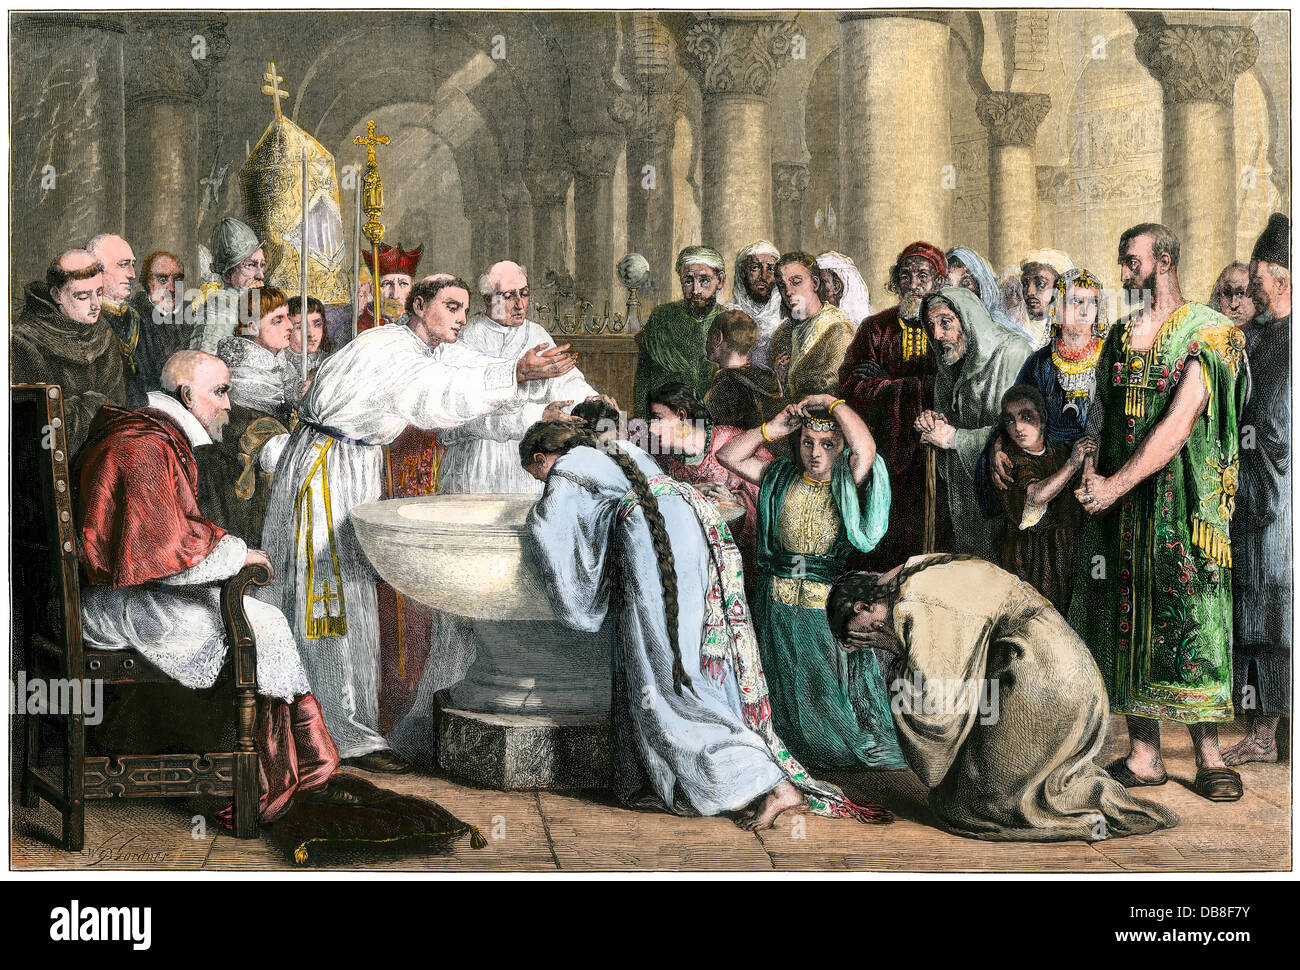 Compulsory baptism of the Moors after the Reconquista, Granada, Spain, 1500. Hand-colored woodcut Stock Photo